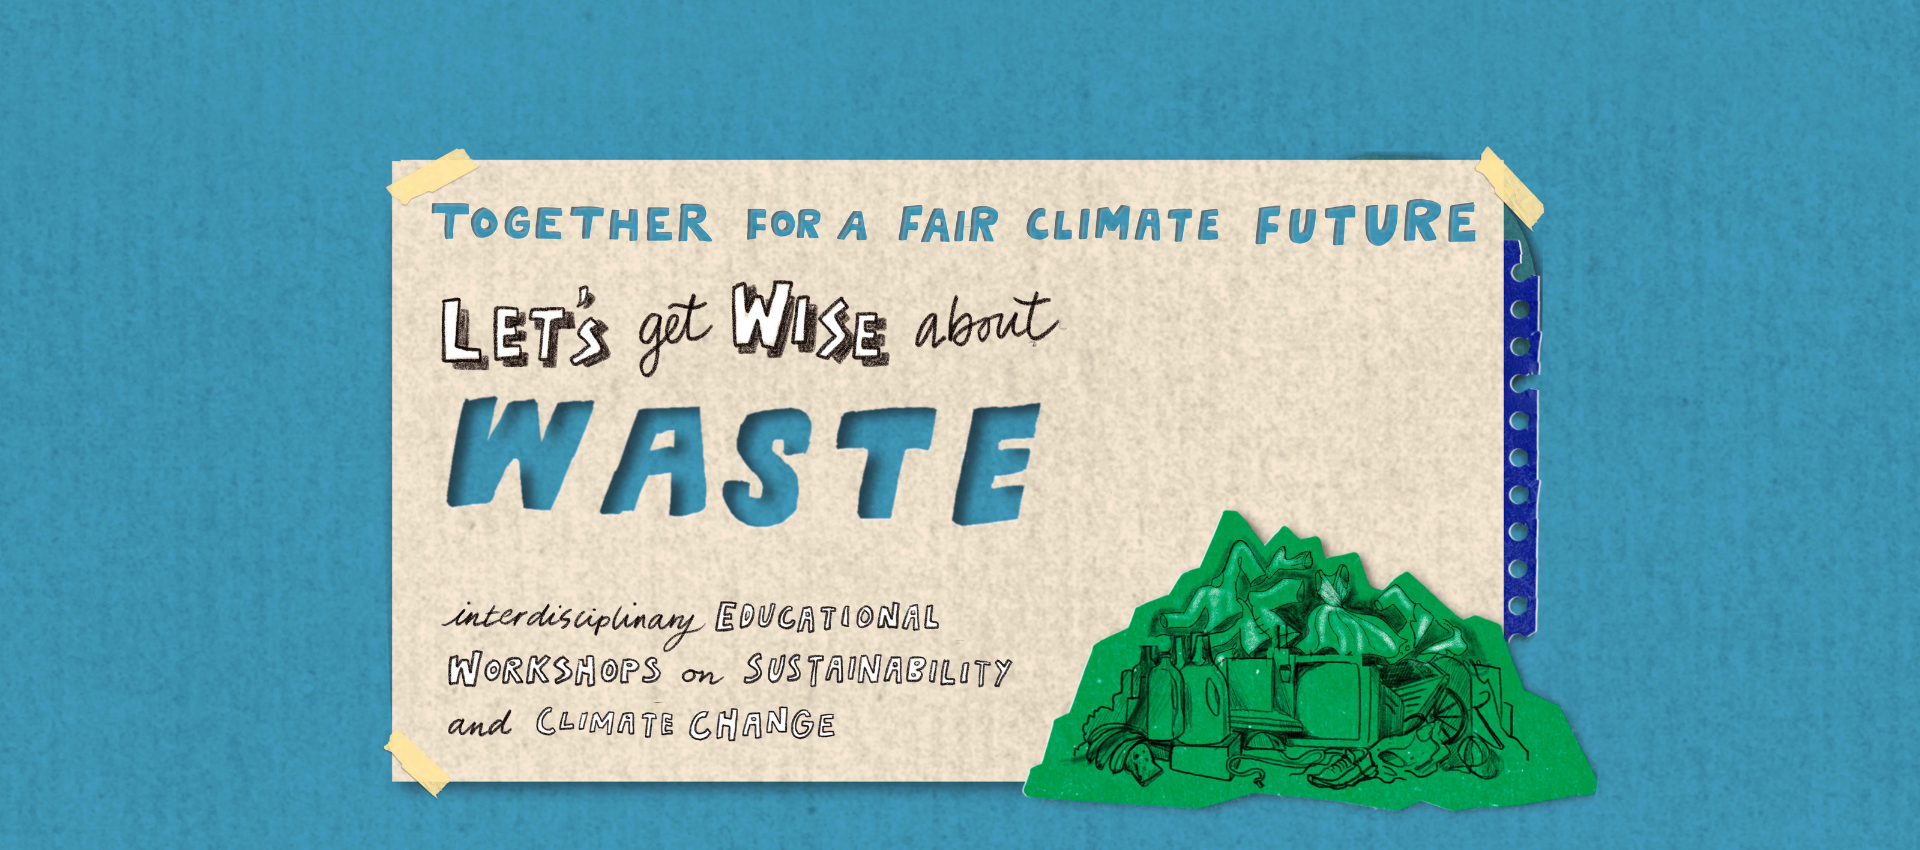 Let's get wise about waste